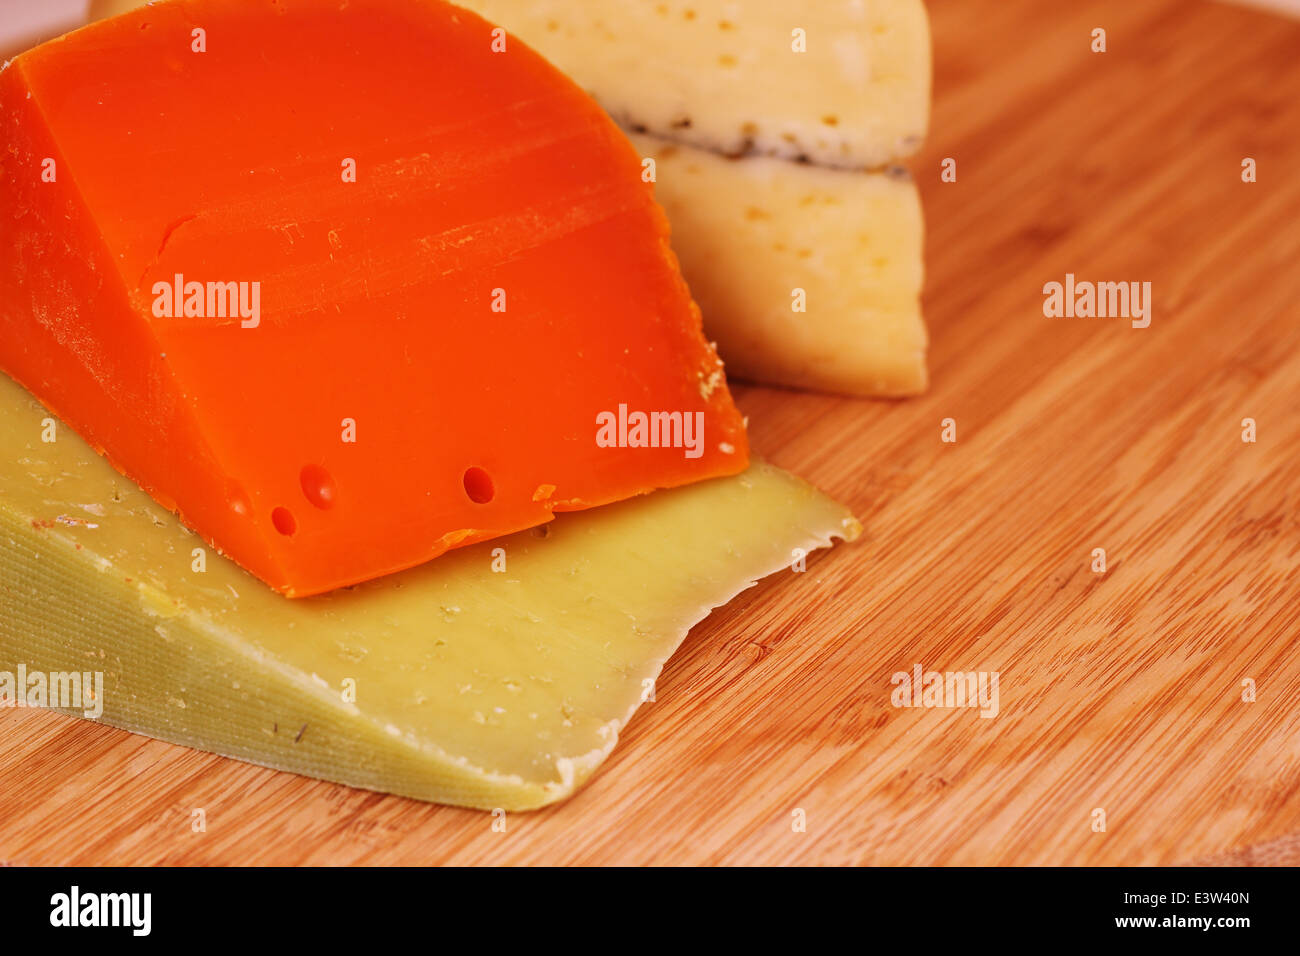 Various types of french cheese on wooden board close-up Stock Photo